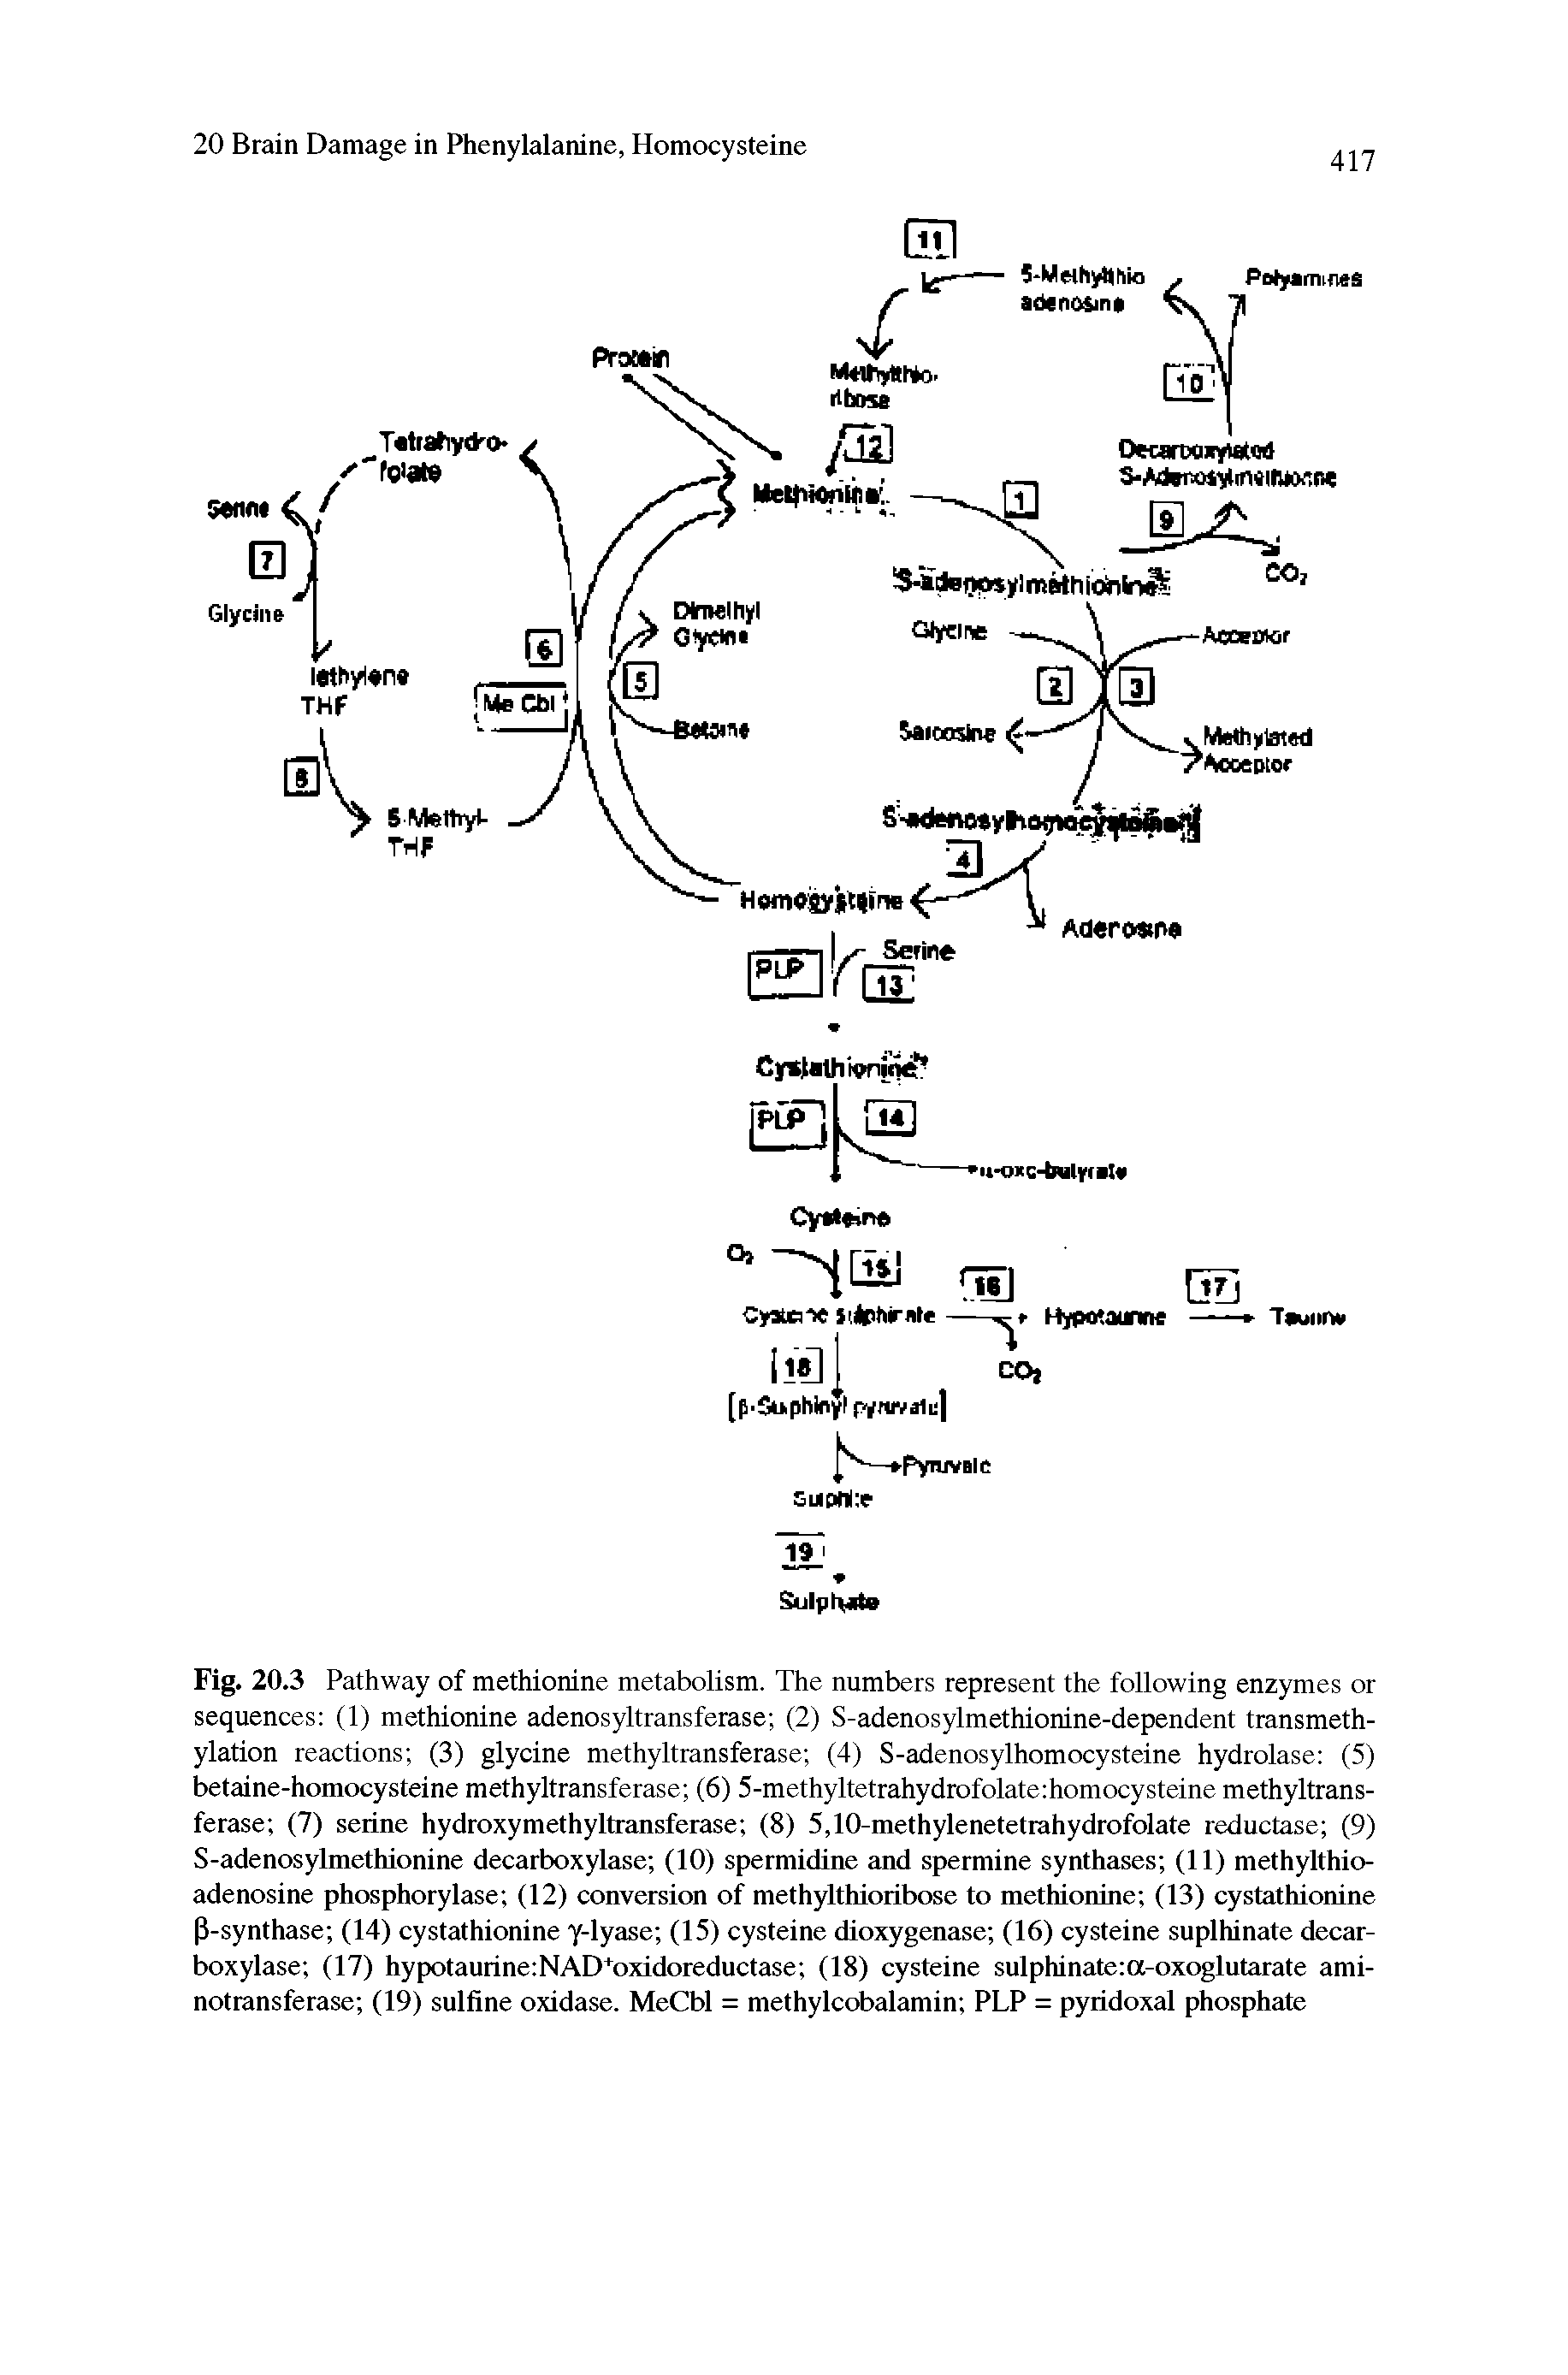 Fig. 20.3 Pathway of methionine metabolism. The numbers represent the following enzymes or sequences (1) methionine adenosyltransferase (2) S-adenosylmethionine-dependent transmethylation reactions (3) glycine methyltransferase (4) S-adenosylhomocysteine hydrolase (5) betaine-homocysteine methyltransferase (6) 5-methyltetrahydrofolate homocysteine methyltransferase (7) serine hydroxymethyltransferase (8) 5,10-methylenetetrahydrofolate reductase (9) S-adenosylmethionine decarboxylase (10) spermidine and spermine synthases (11) methylthio-adenosine phosphorylase (12) conversion of methylthioribose to methionine (13) cystathionine P-synthase (14) cystathionine y-lyase (15) cysteine dioxygenase (16) cysteine suplhinate decarboxylase (17) hypotaurine NAD oxidoreductase (18) cysteine sulphintite a-oxoglutarate aminotransferase (19) sulfine oxidase. MeCbl = methylcobalamin PLP = pyridoxal phosphate...